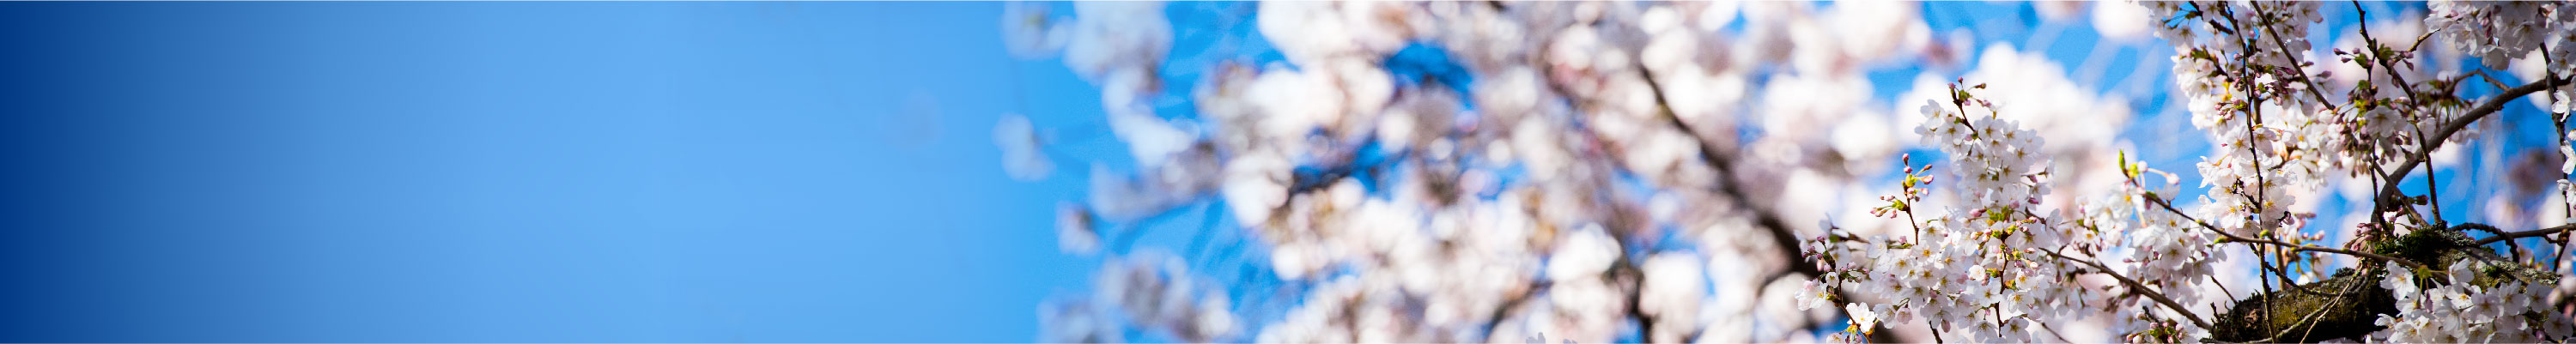 Photo of cherry blossoms